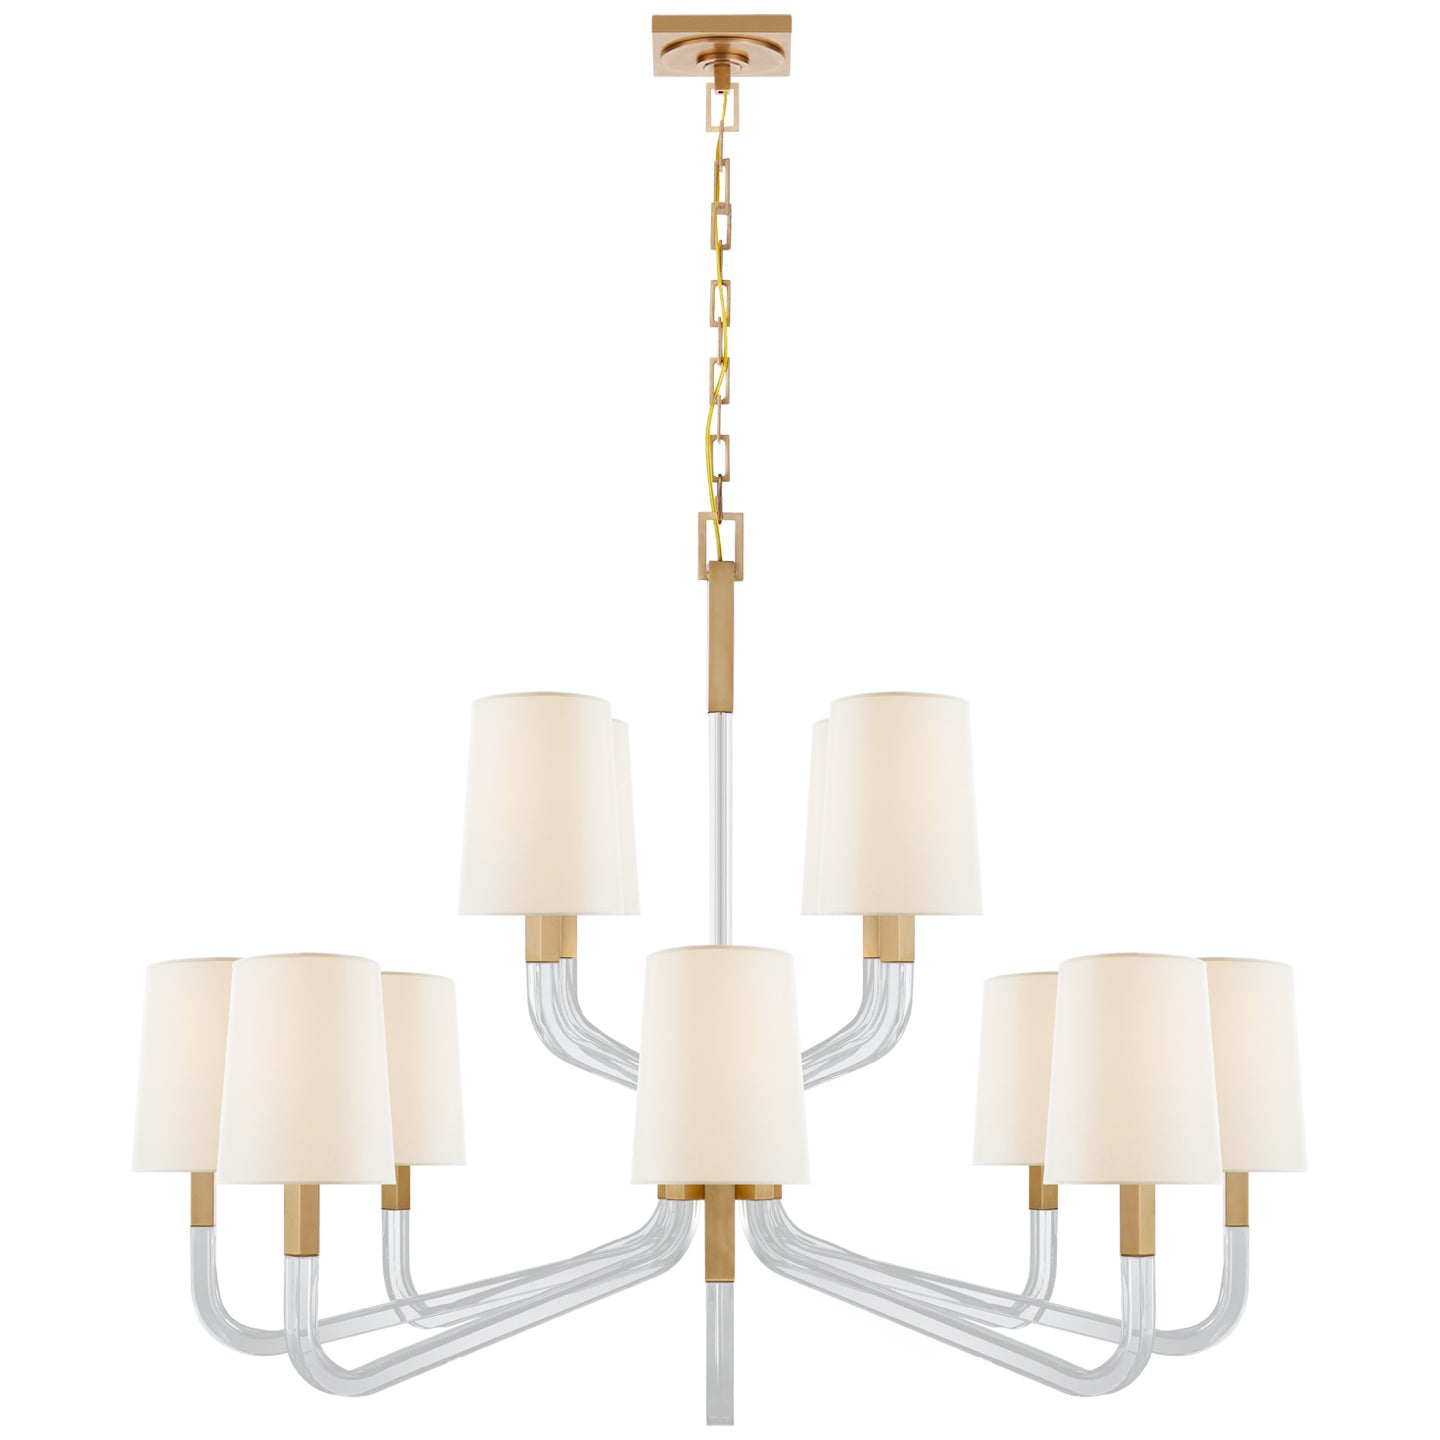 Visual Comfort Signature - CHC 5904AB/CG-L - 12 Light Chandelier - Reagan - Antique-Burnished Brass and Crystal